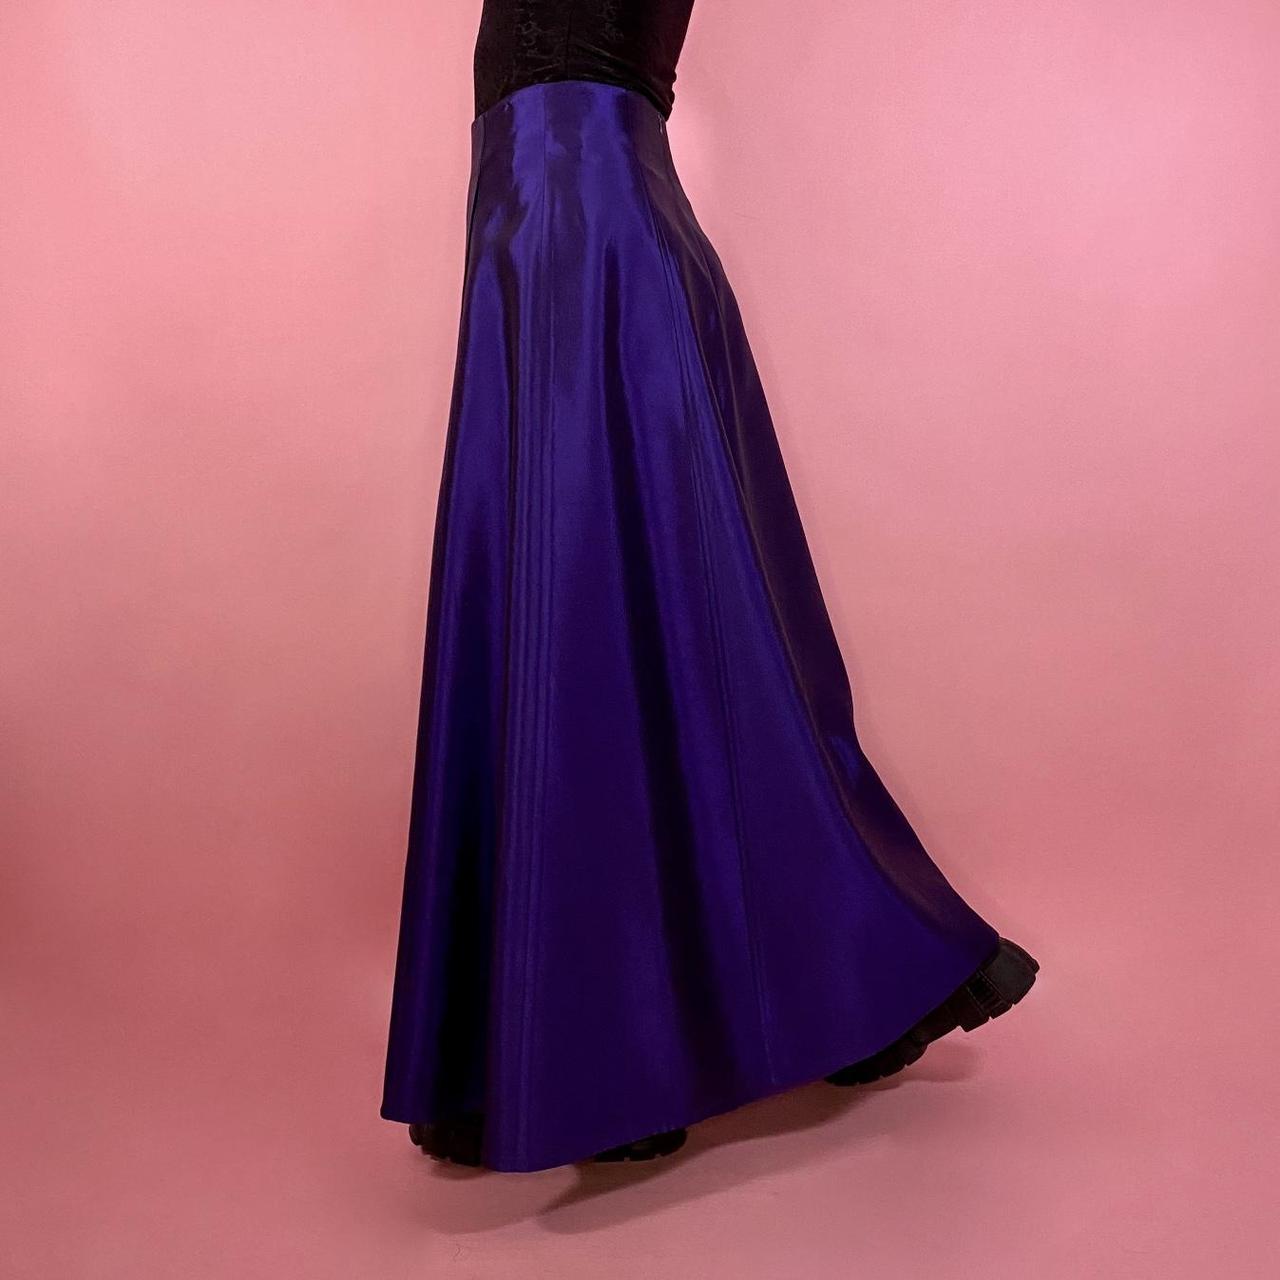 Product Image 1 - Vintage iridescent maxi skirt

From the